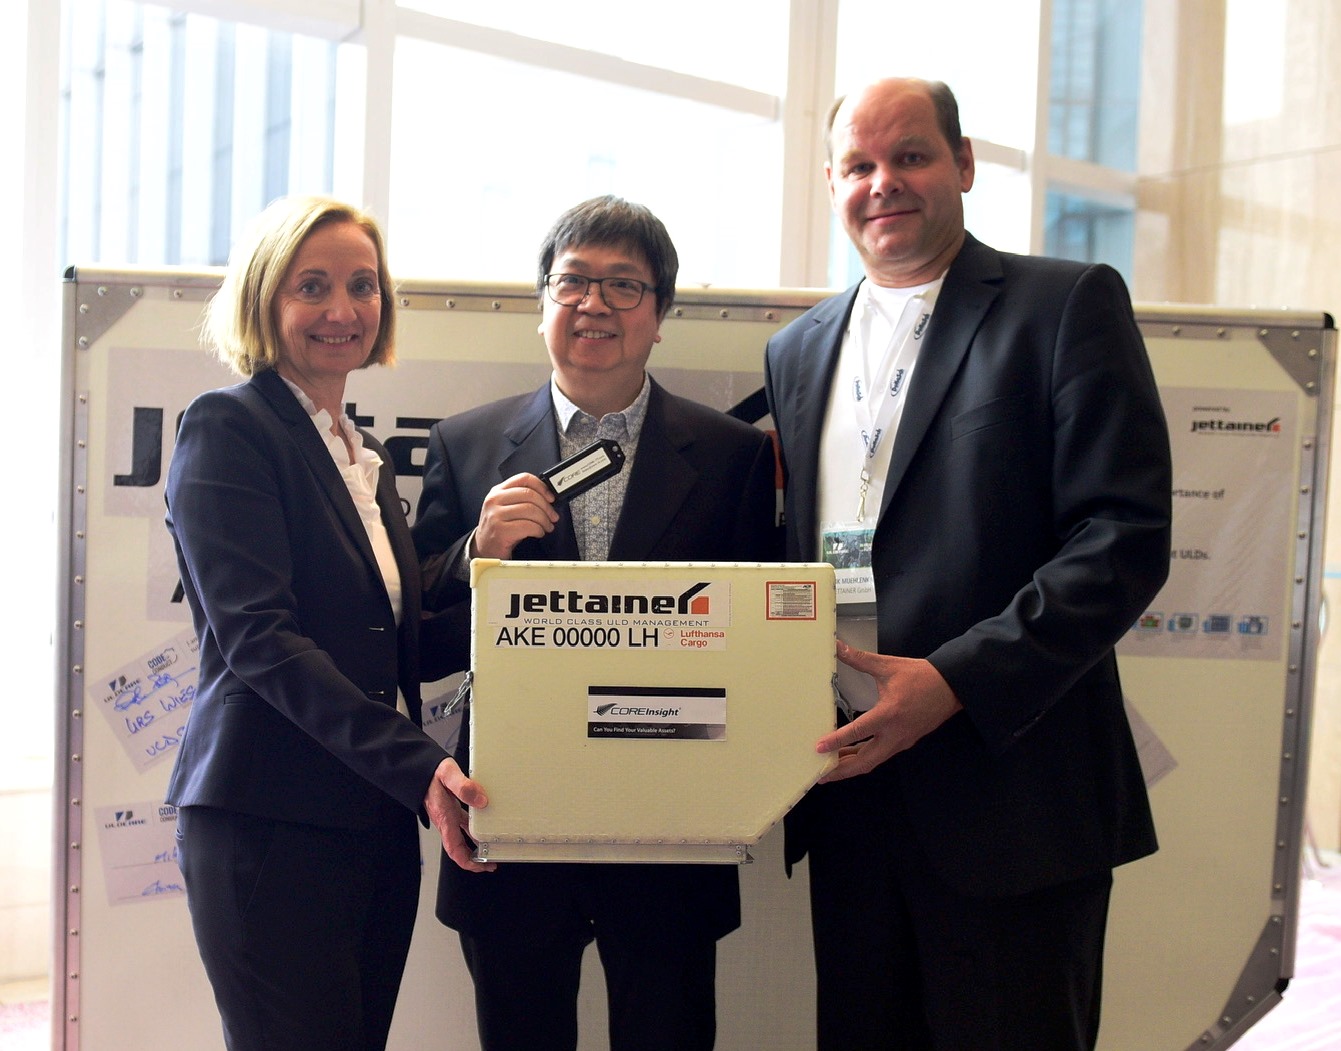 Ingeborg Manz-Maier, director of finance at Jettainer, and Frank Mühlenkamp, director pperations at Jettainer (right), with Frank Hung, executive VP of sales and marketing at CORE Transport Technologies Inc., at ULD Care